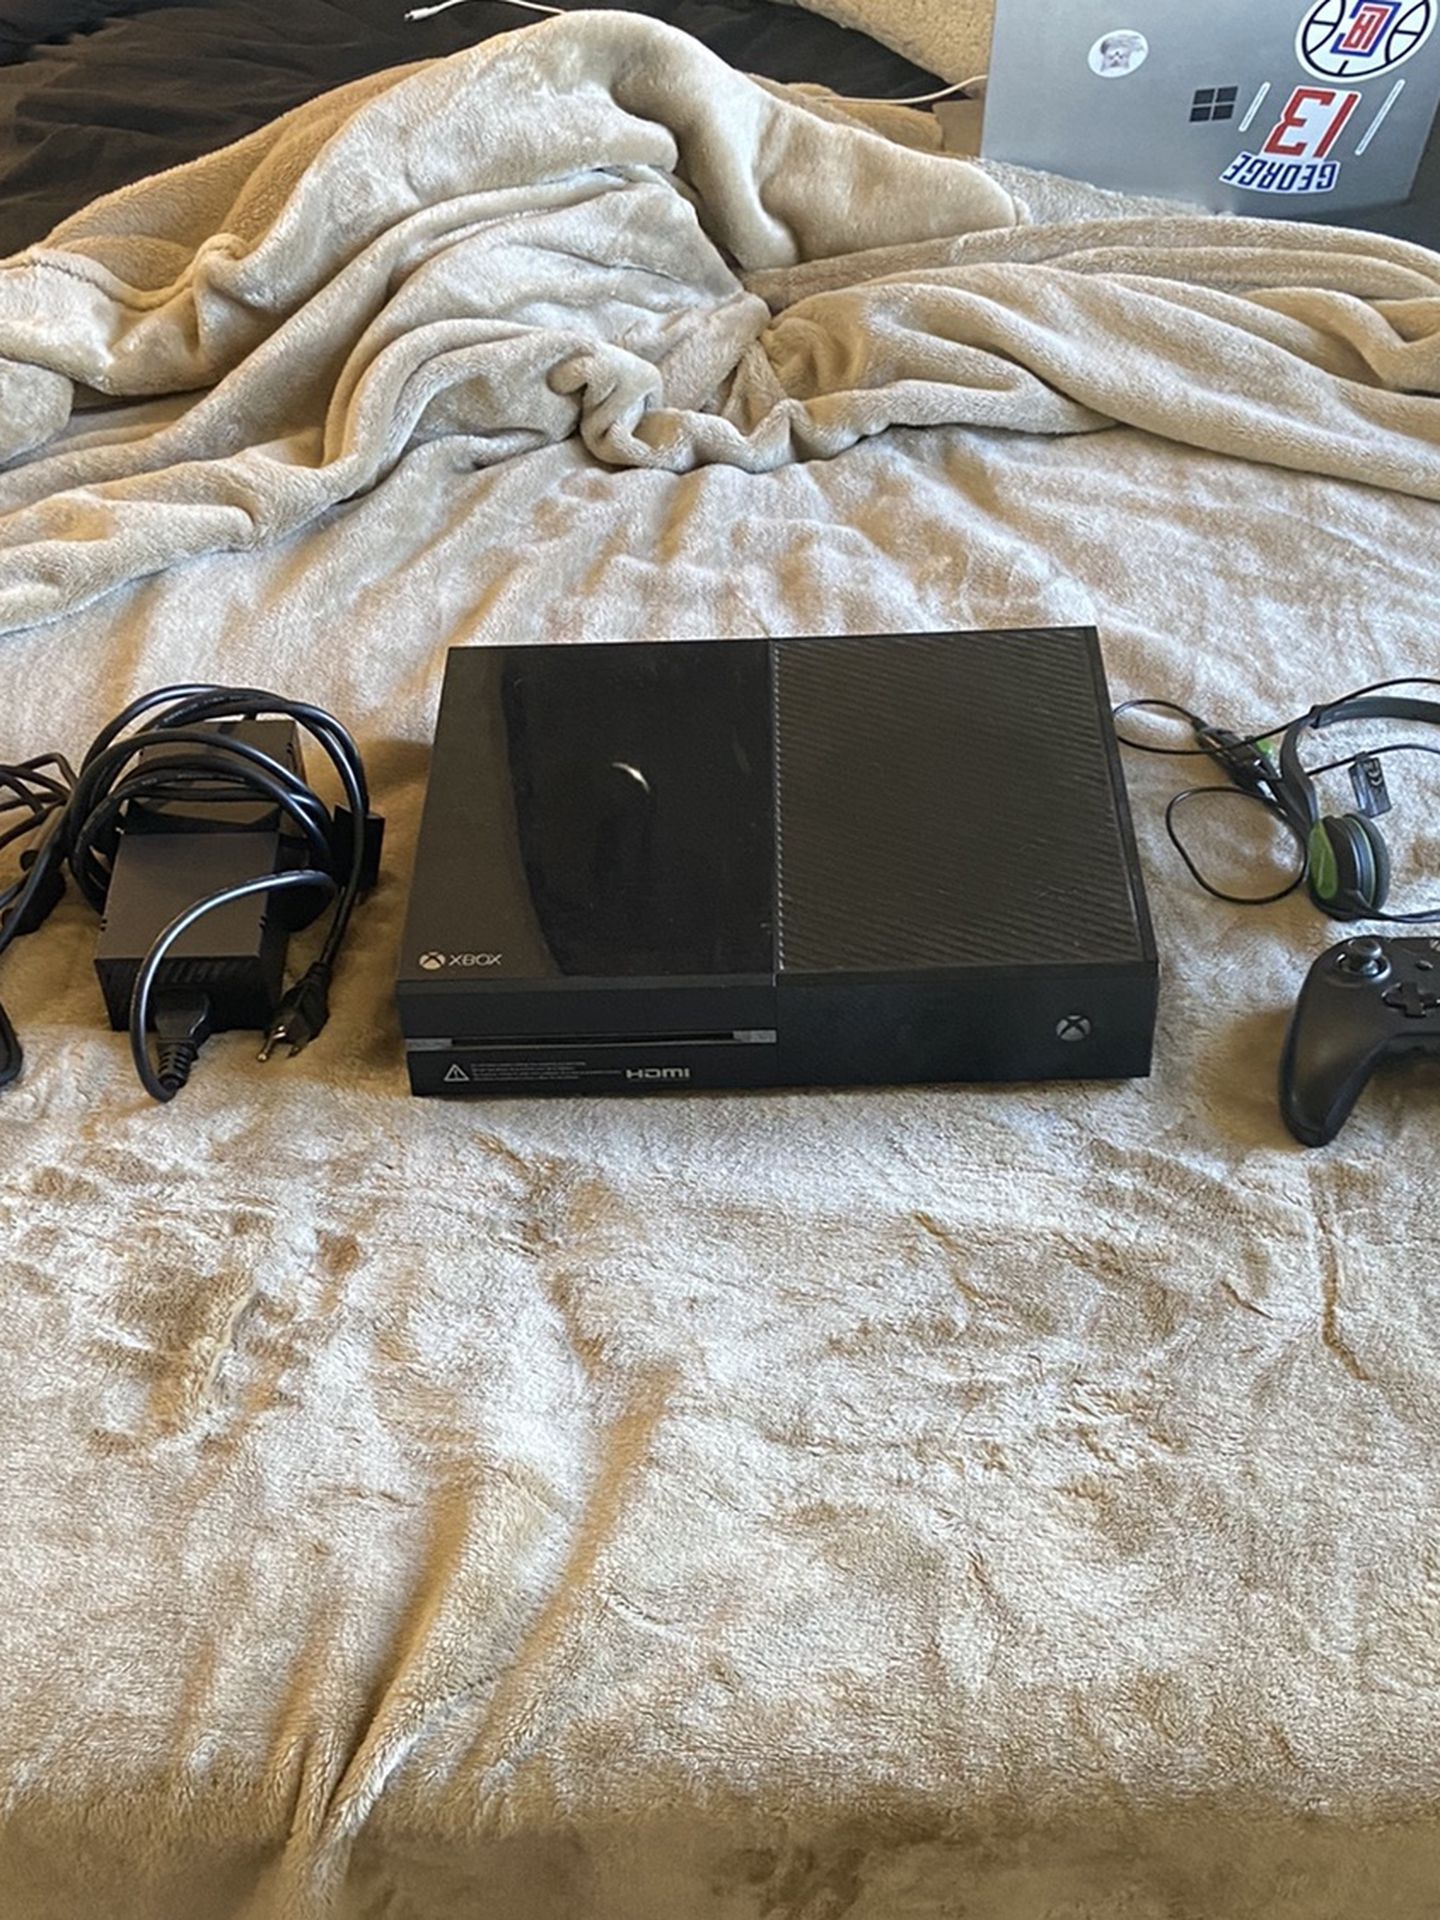 Xbox One w/ Controller + Headset